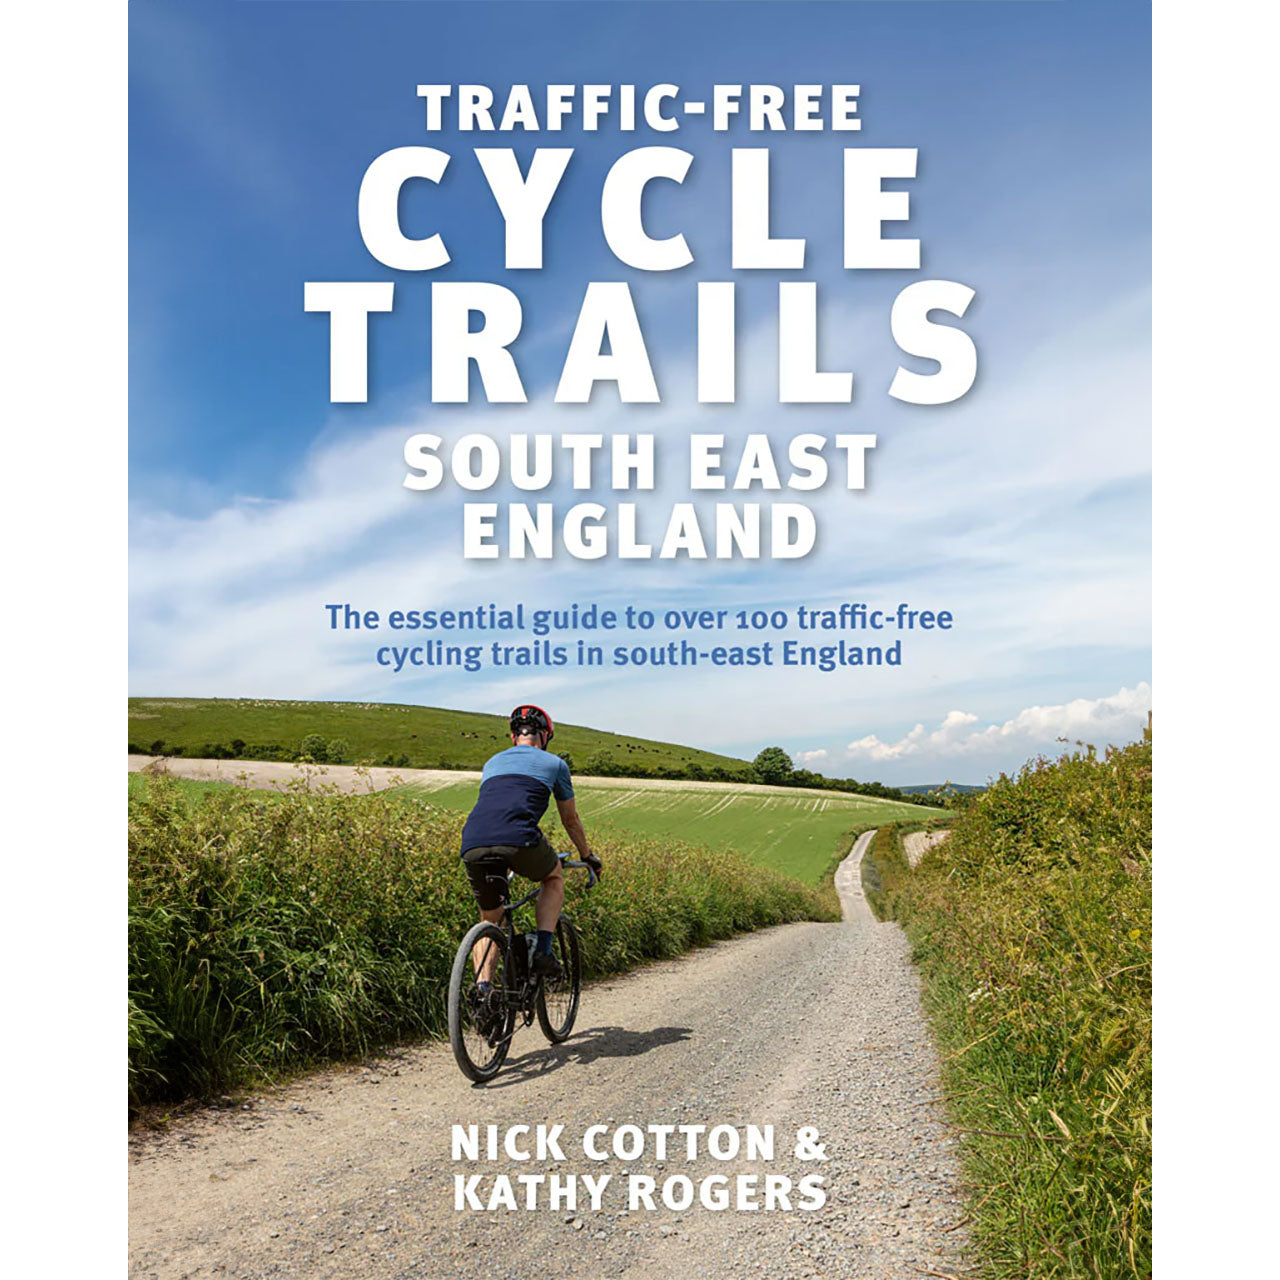 Traffic Free Cycle Trails South East England by Nick Cotton & Kathy Rogers